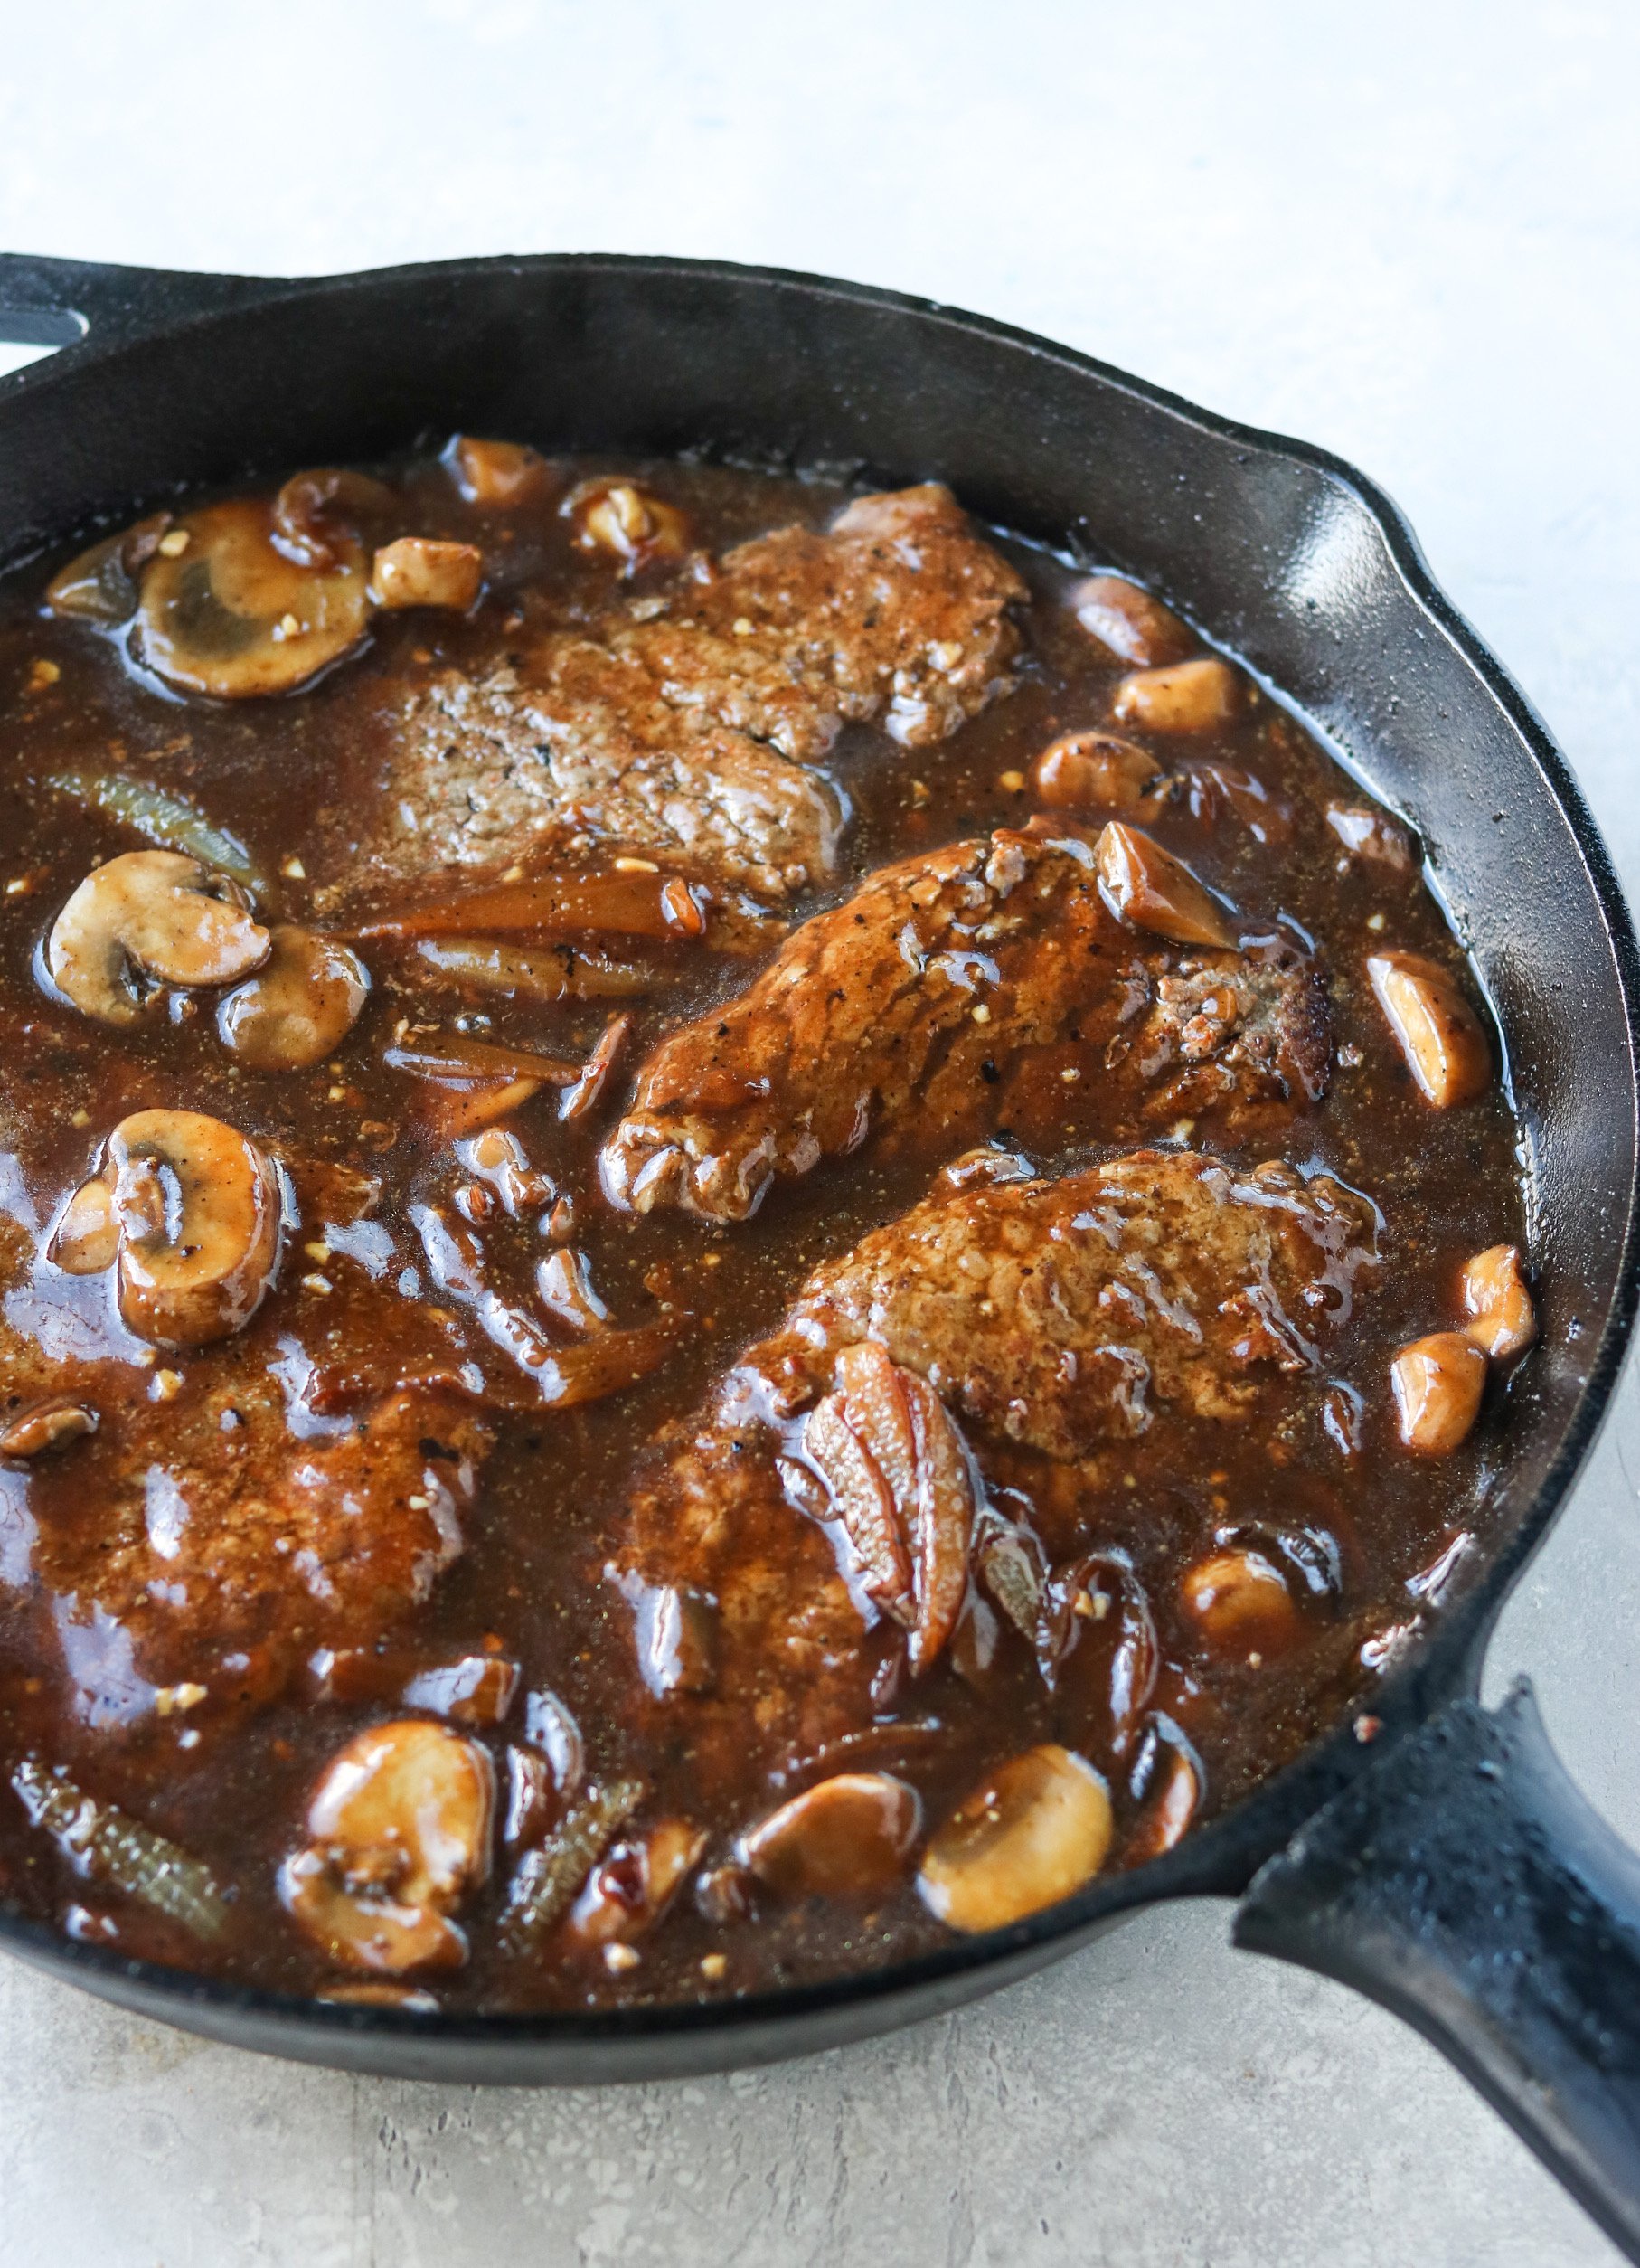 cubed steak with mushroom and onion gravy in a 12-inch cast iron skillet